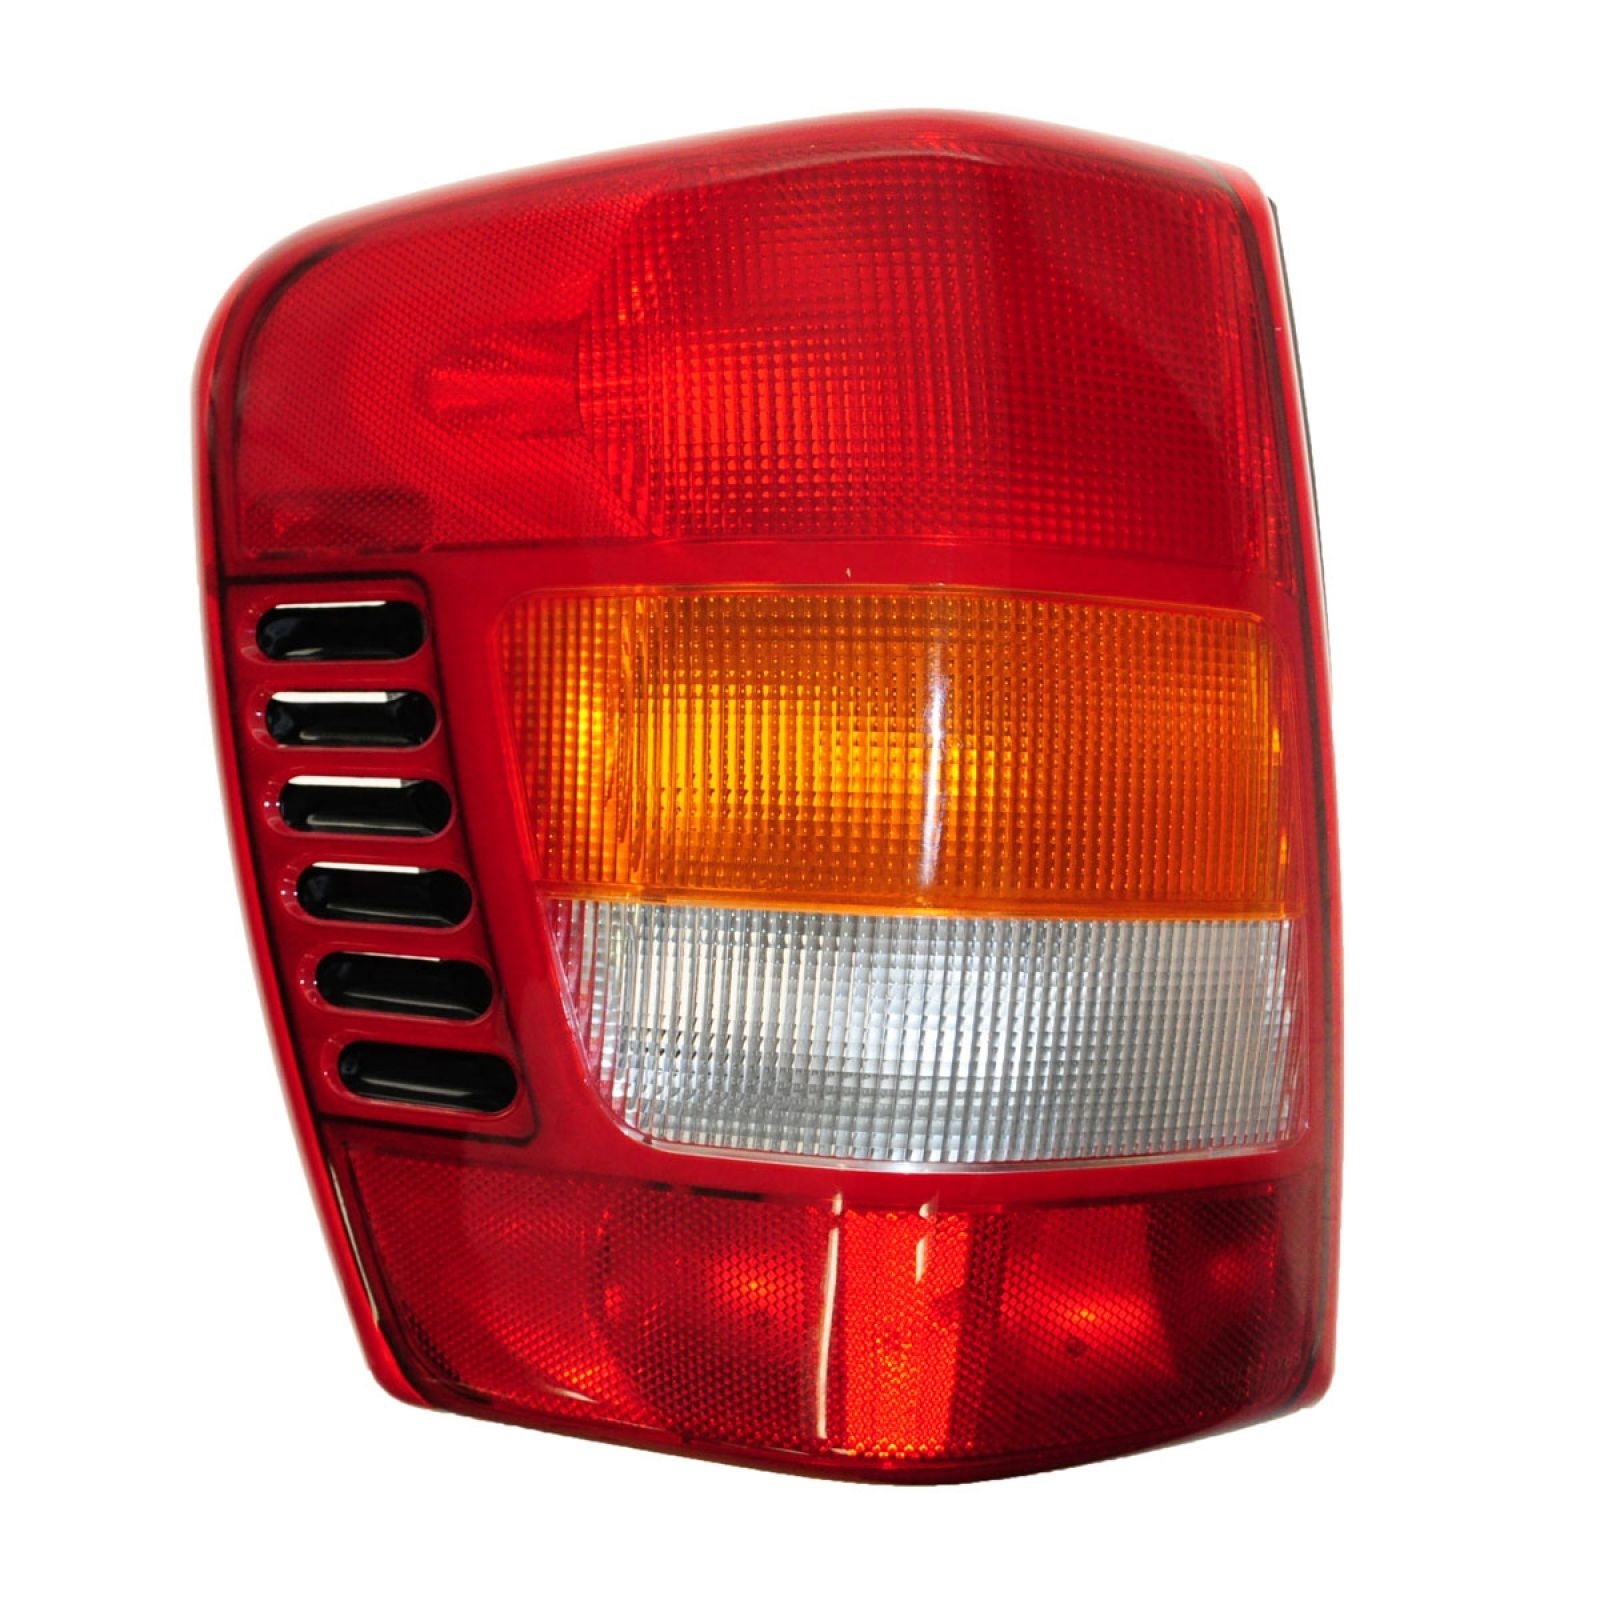 Diy Solutions Tail Light For 99-03 Grand Cherokee Driver Side, HWNV-LHT05744